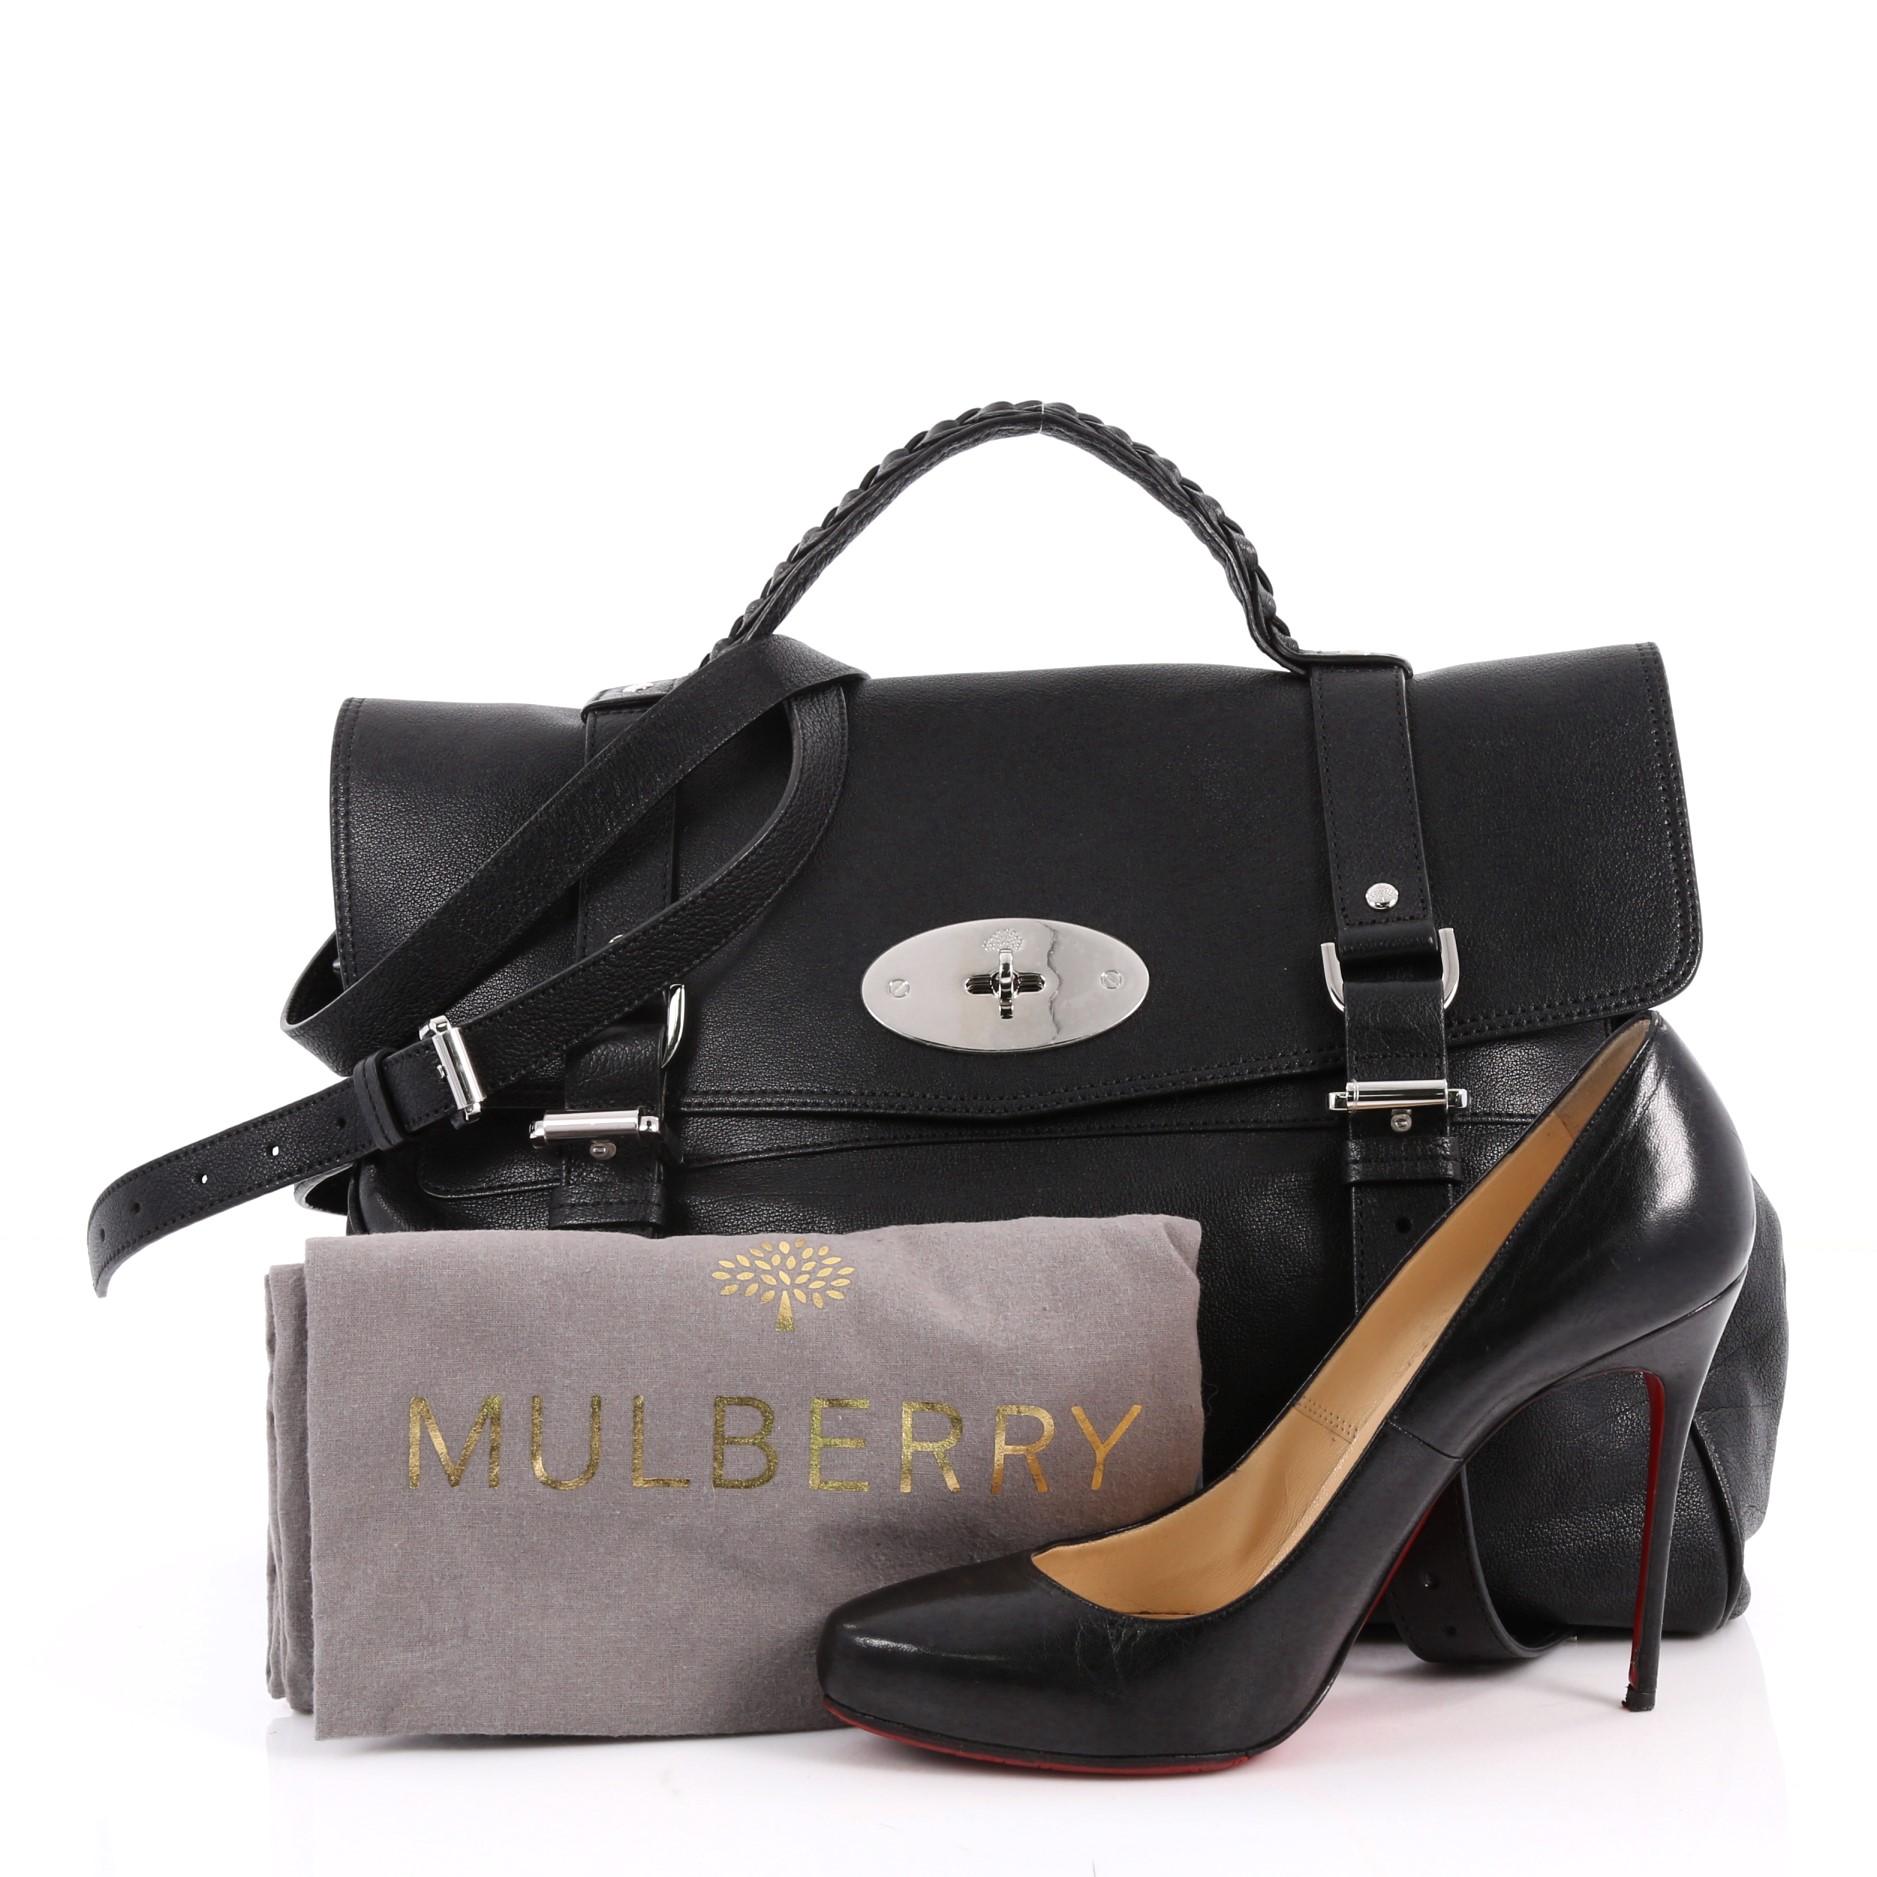 This authentic Mulberry Alexa Satchel Polished Buffalo Medium depicts a stylish and functional style made for fashionistas. Crafted from black polished buffalo leather, this oversized satchel features a braided top handle, fold over flap with